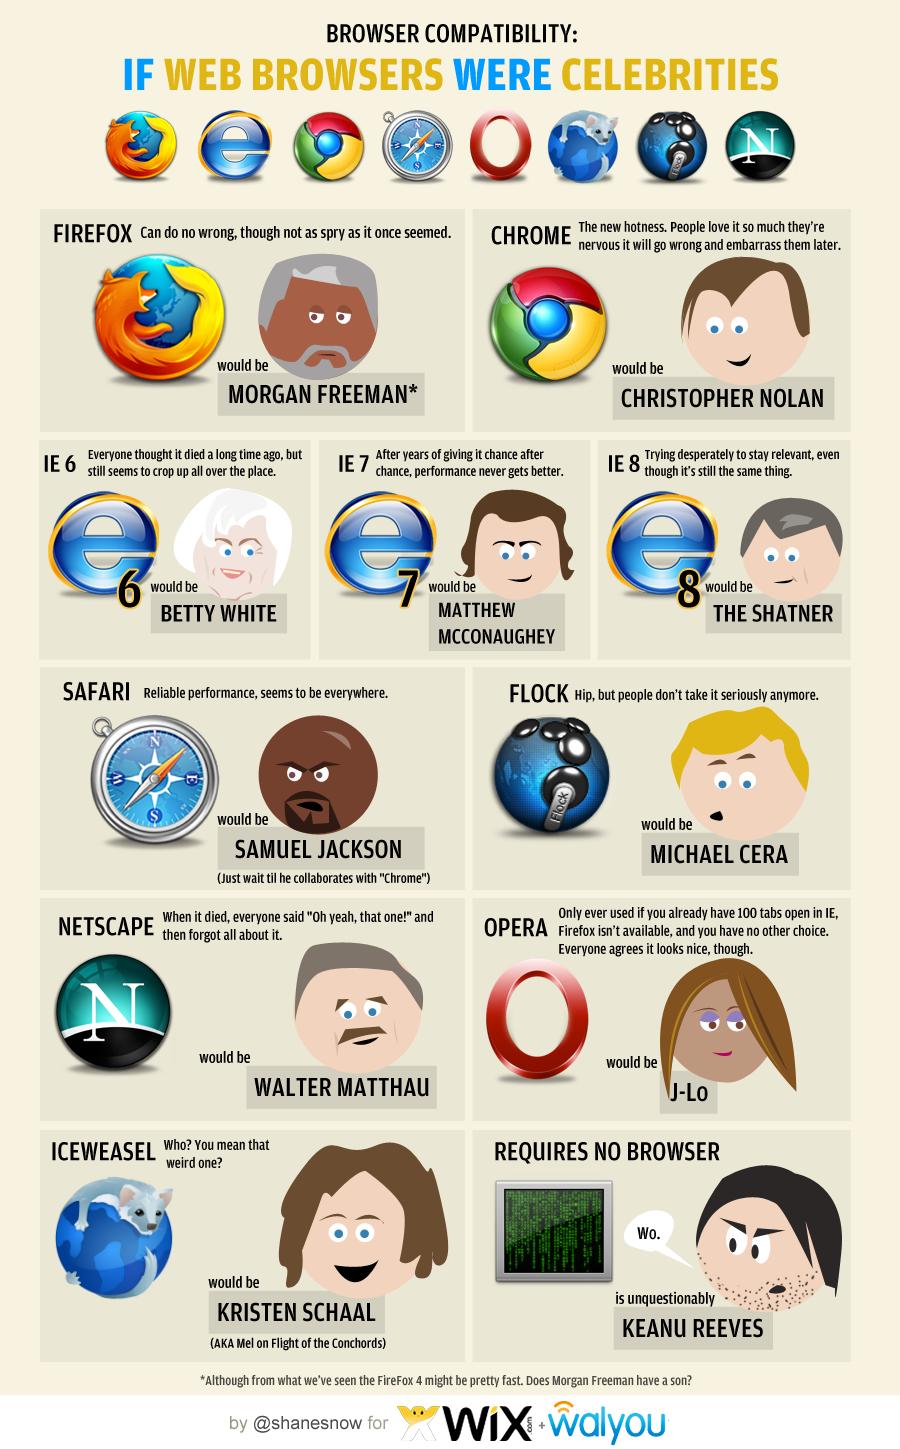 What if Web Browsers Were Celebrities?